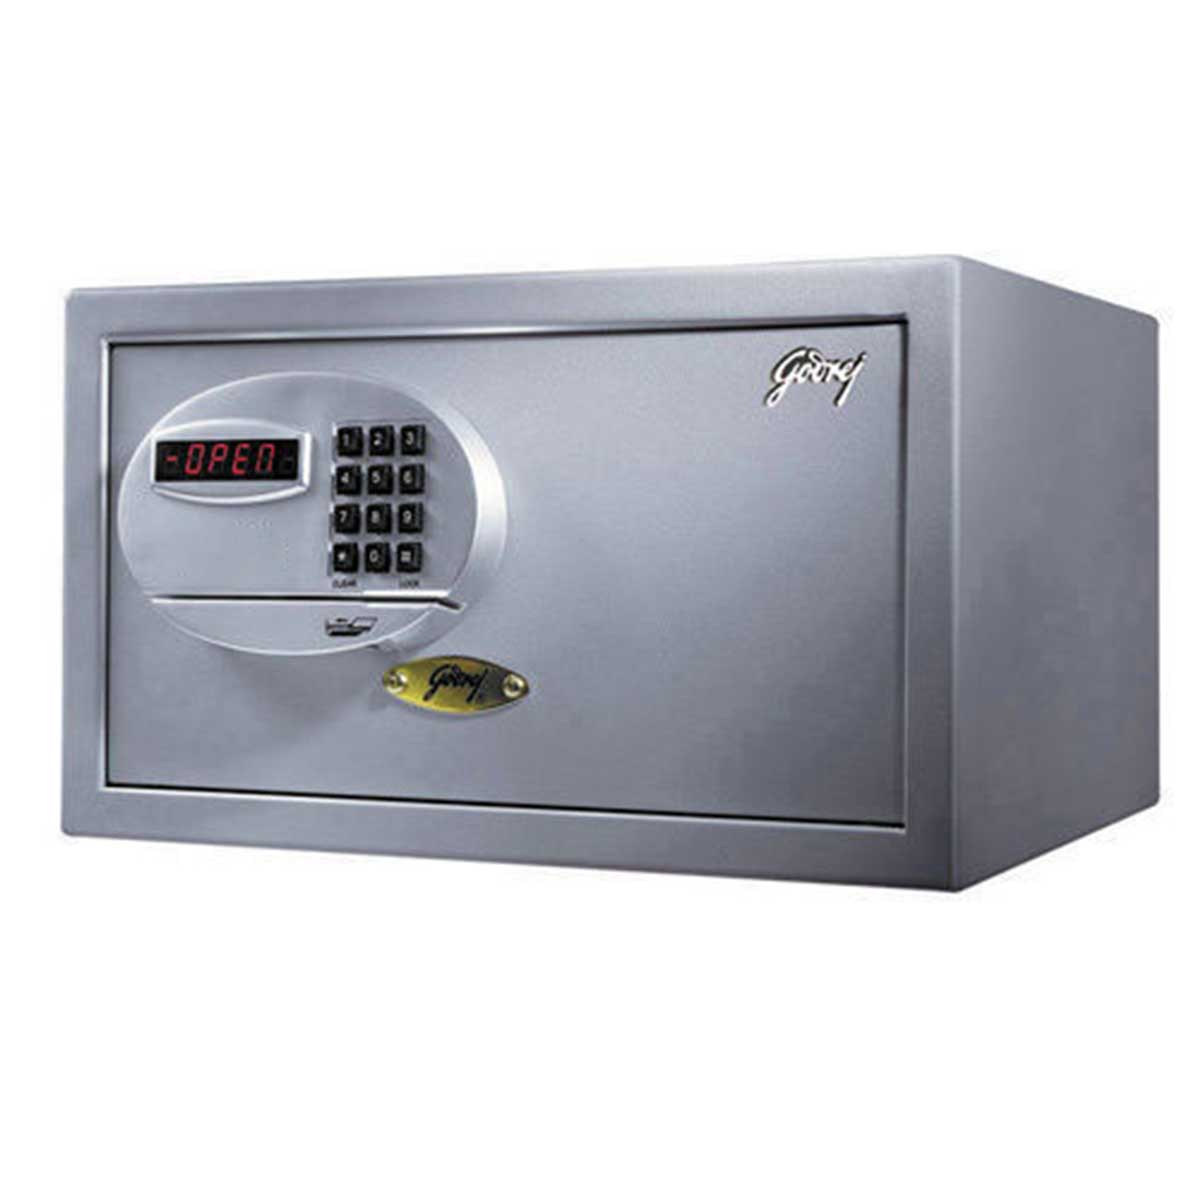 Electronic locker Manufacturers, Suppliers in Noida